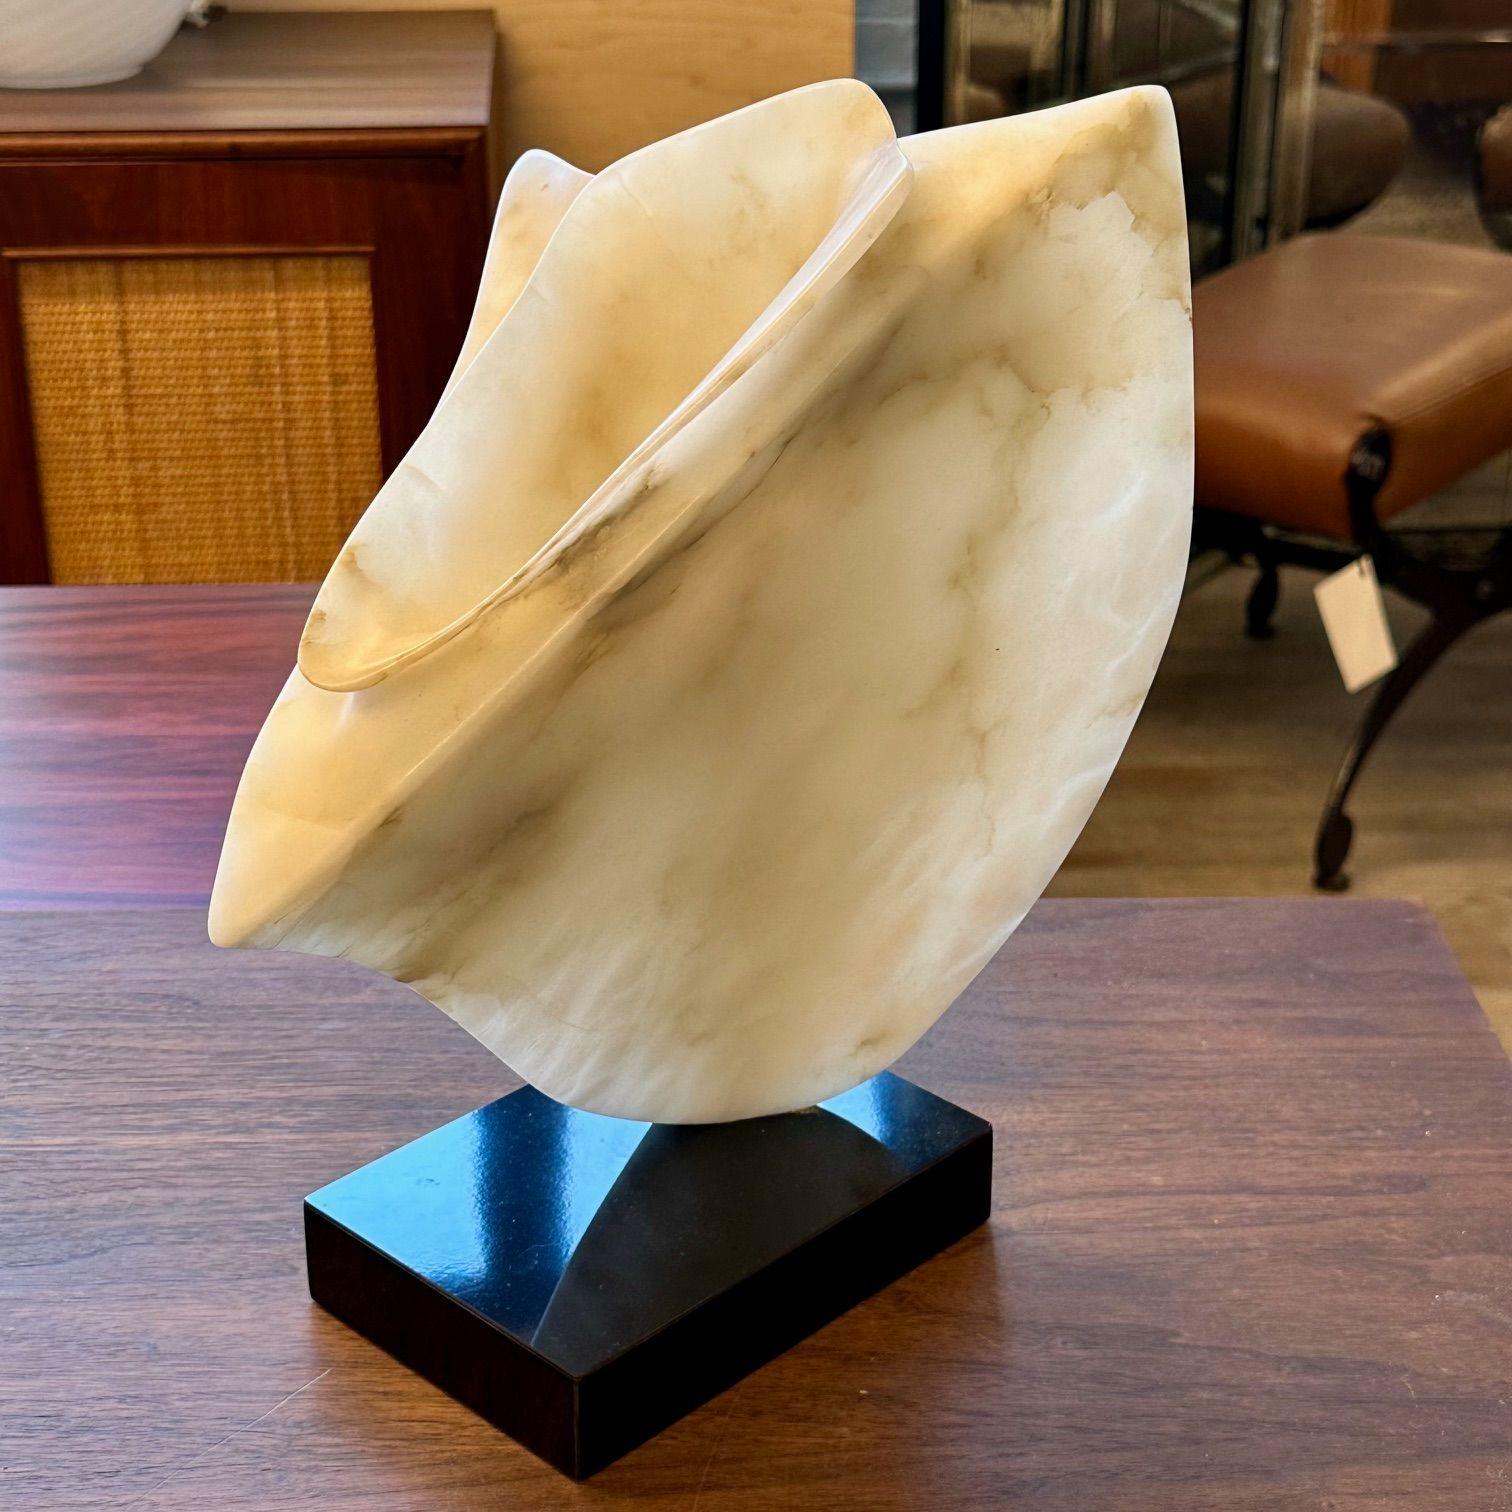 Contemporary Abstract Stone / Marble Sculpture on Base, Organic Form, 1990er Jahre (Moderne) im Angebot